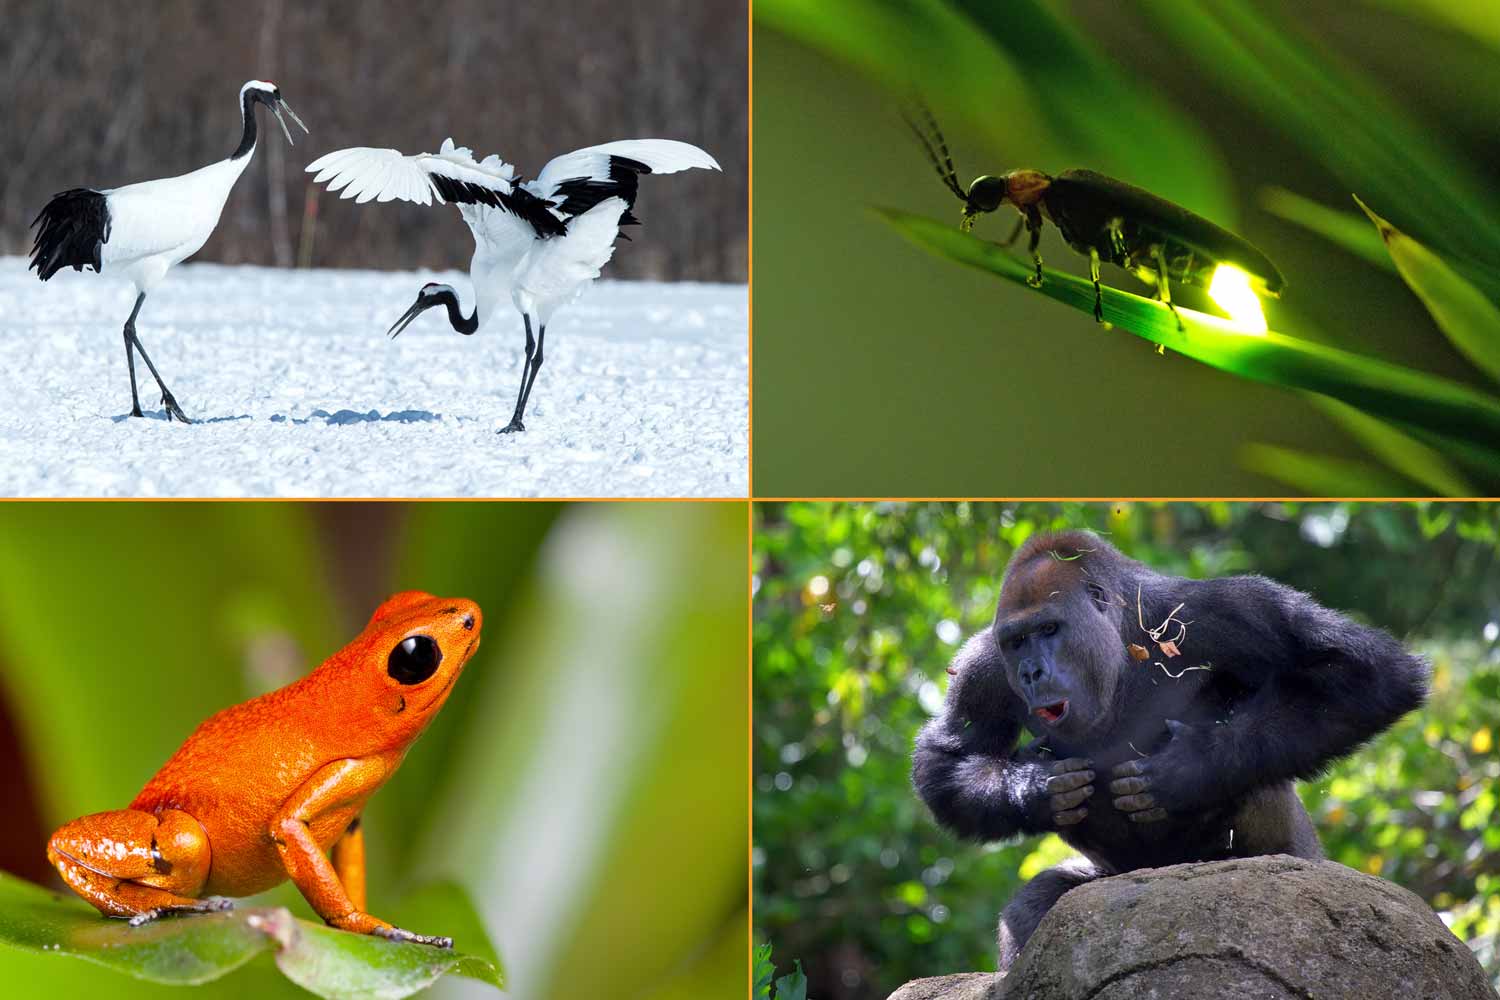 Two cranes interacting, a lit up firefly sitting on a leaf, a red frog, and a gorilla beating its chest